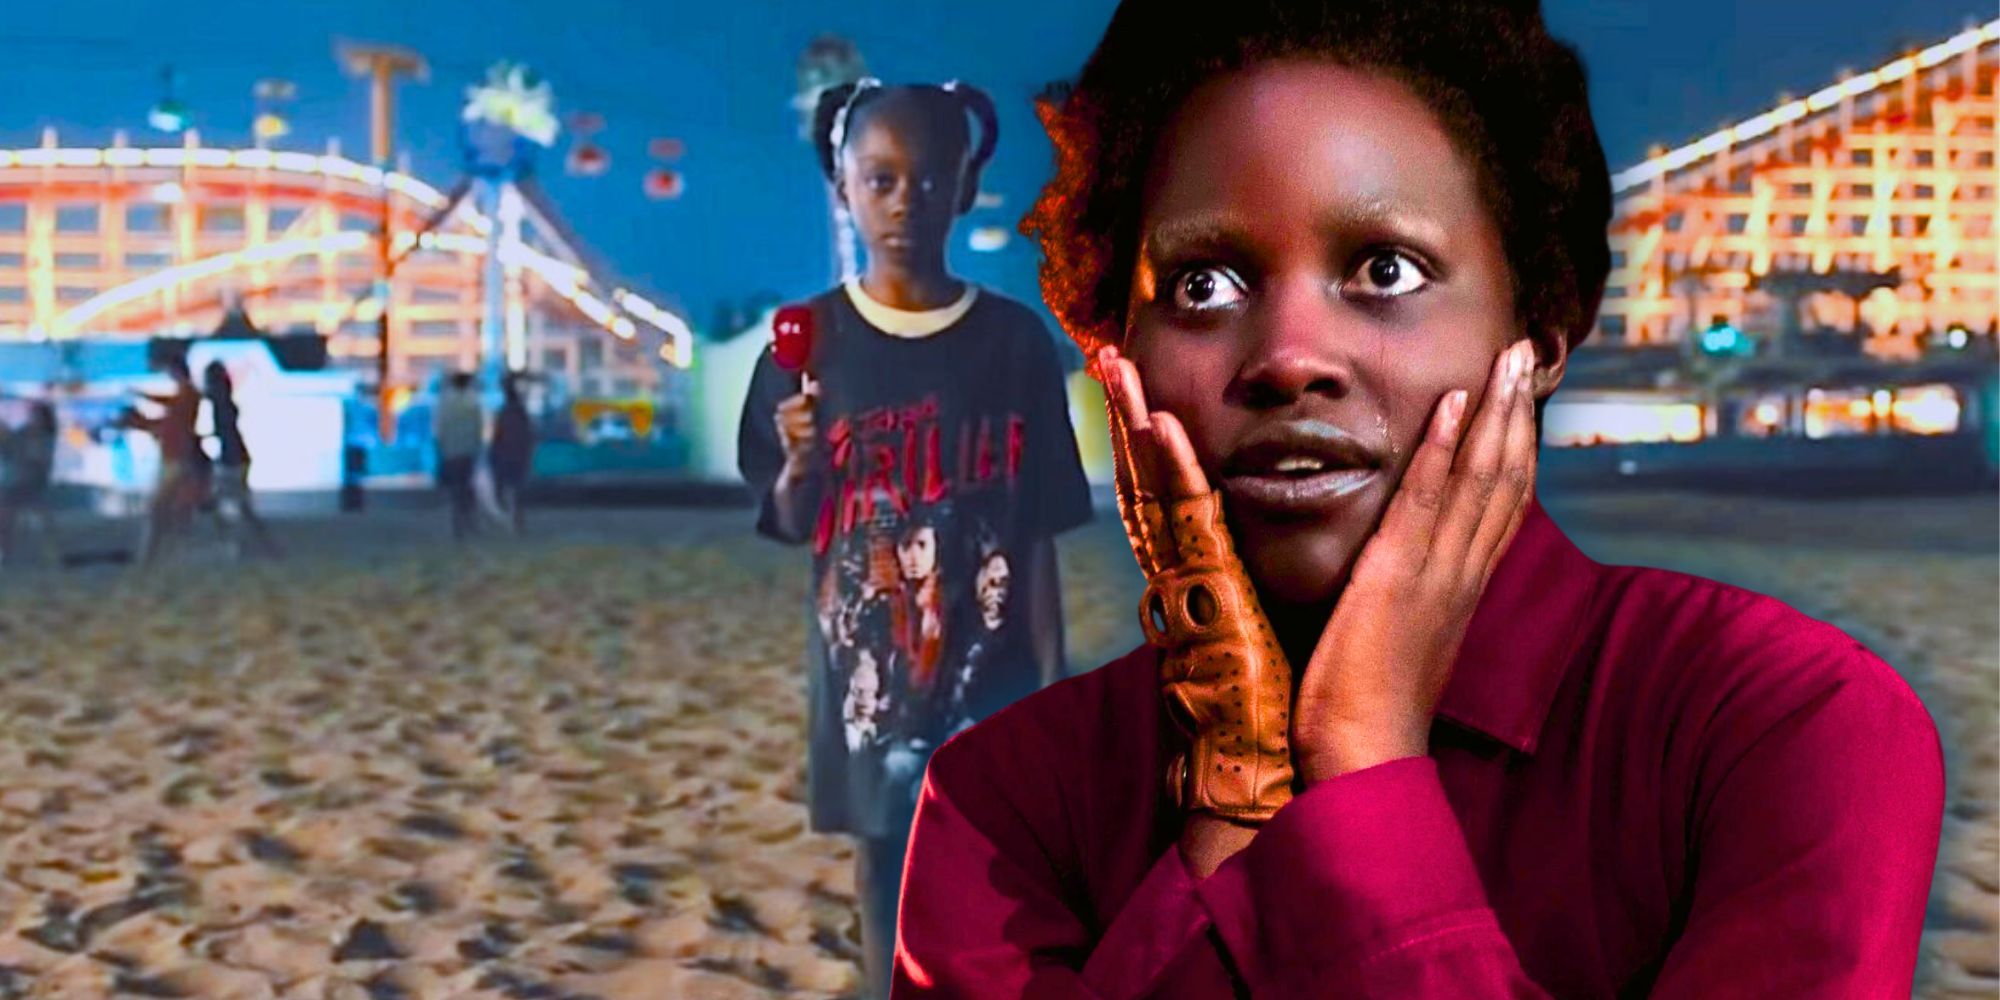 Lupita as Red in Us with Adelaide as a kid at the boardwalk